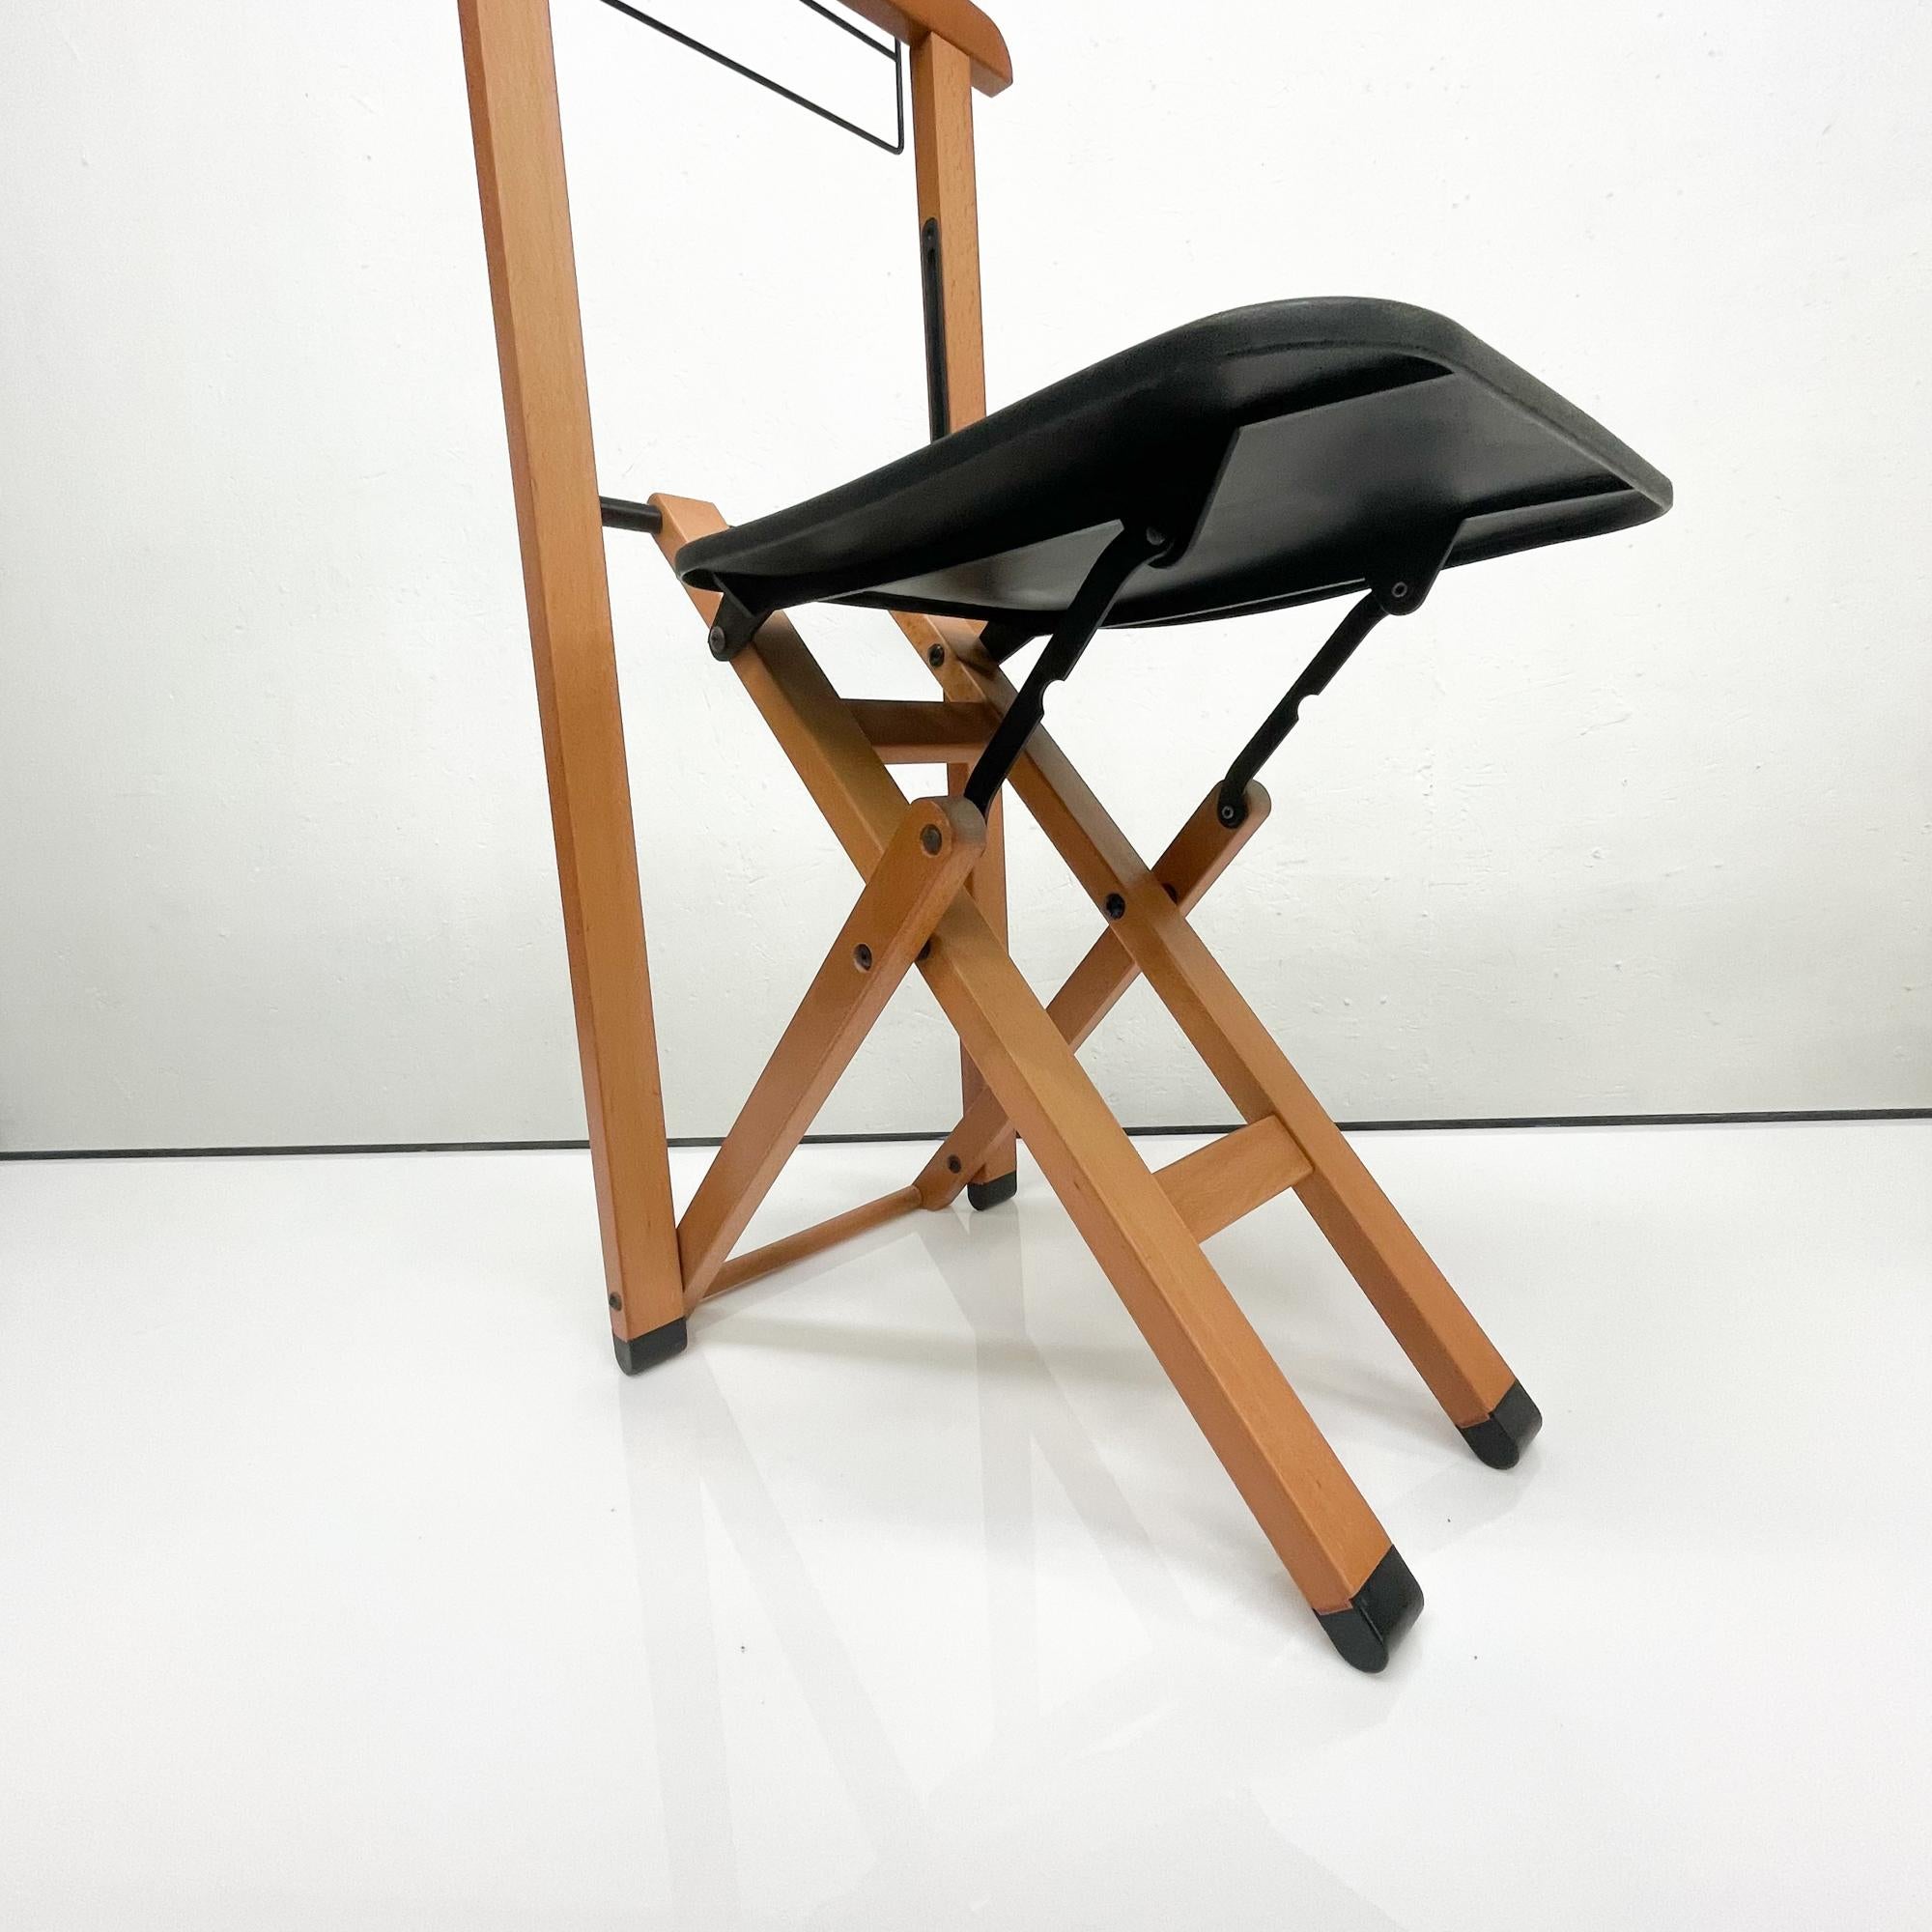 Modern 1990s Foppapedretti Gentleman's Suit Chair Folding Valet Stand Italy